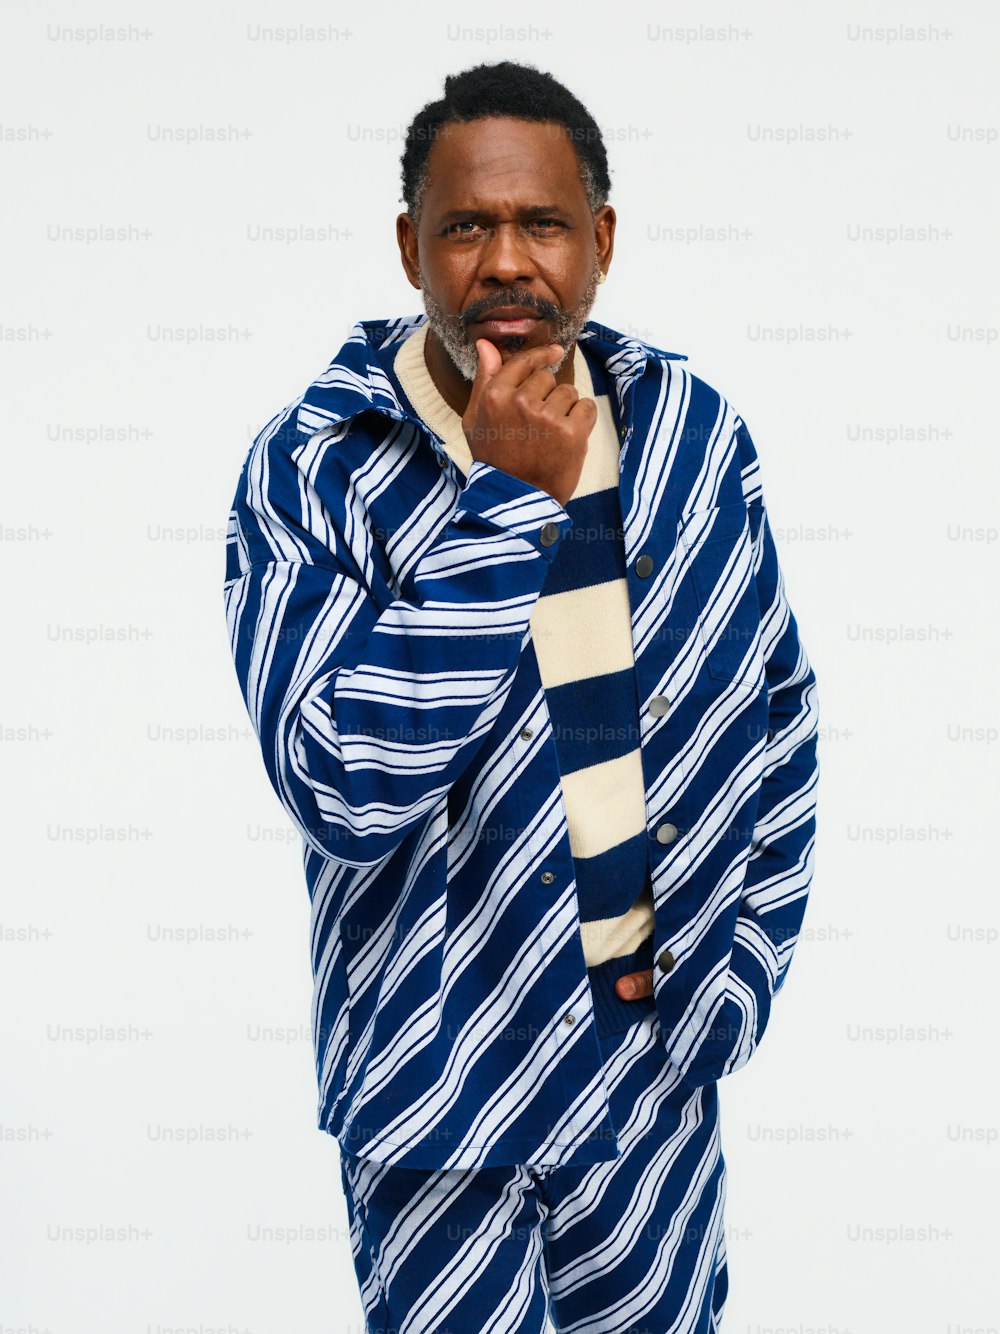 a man wearing a blue and white striped shirt